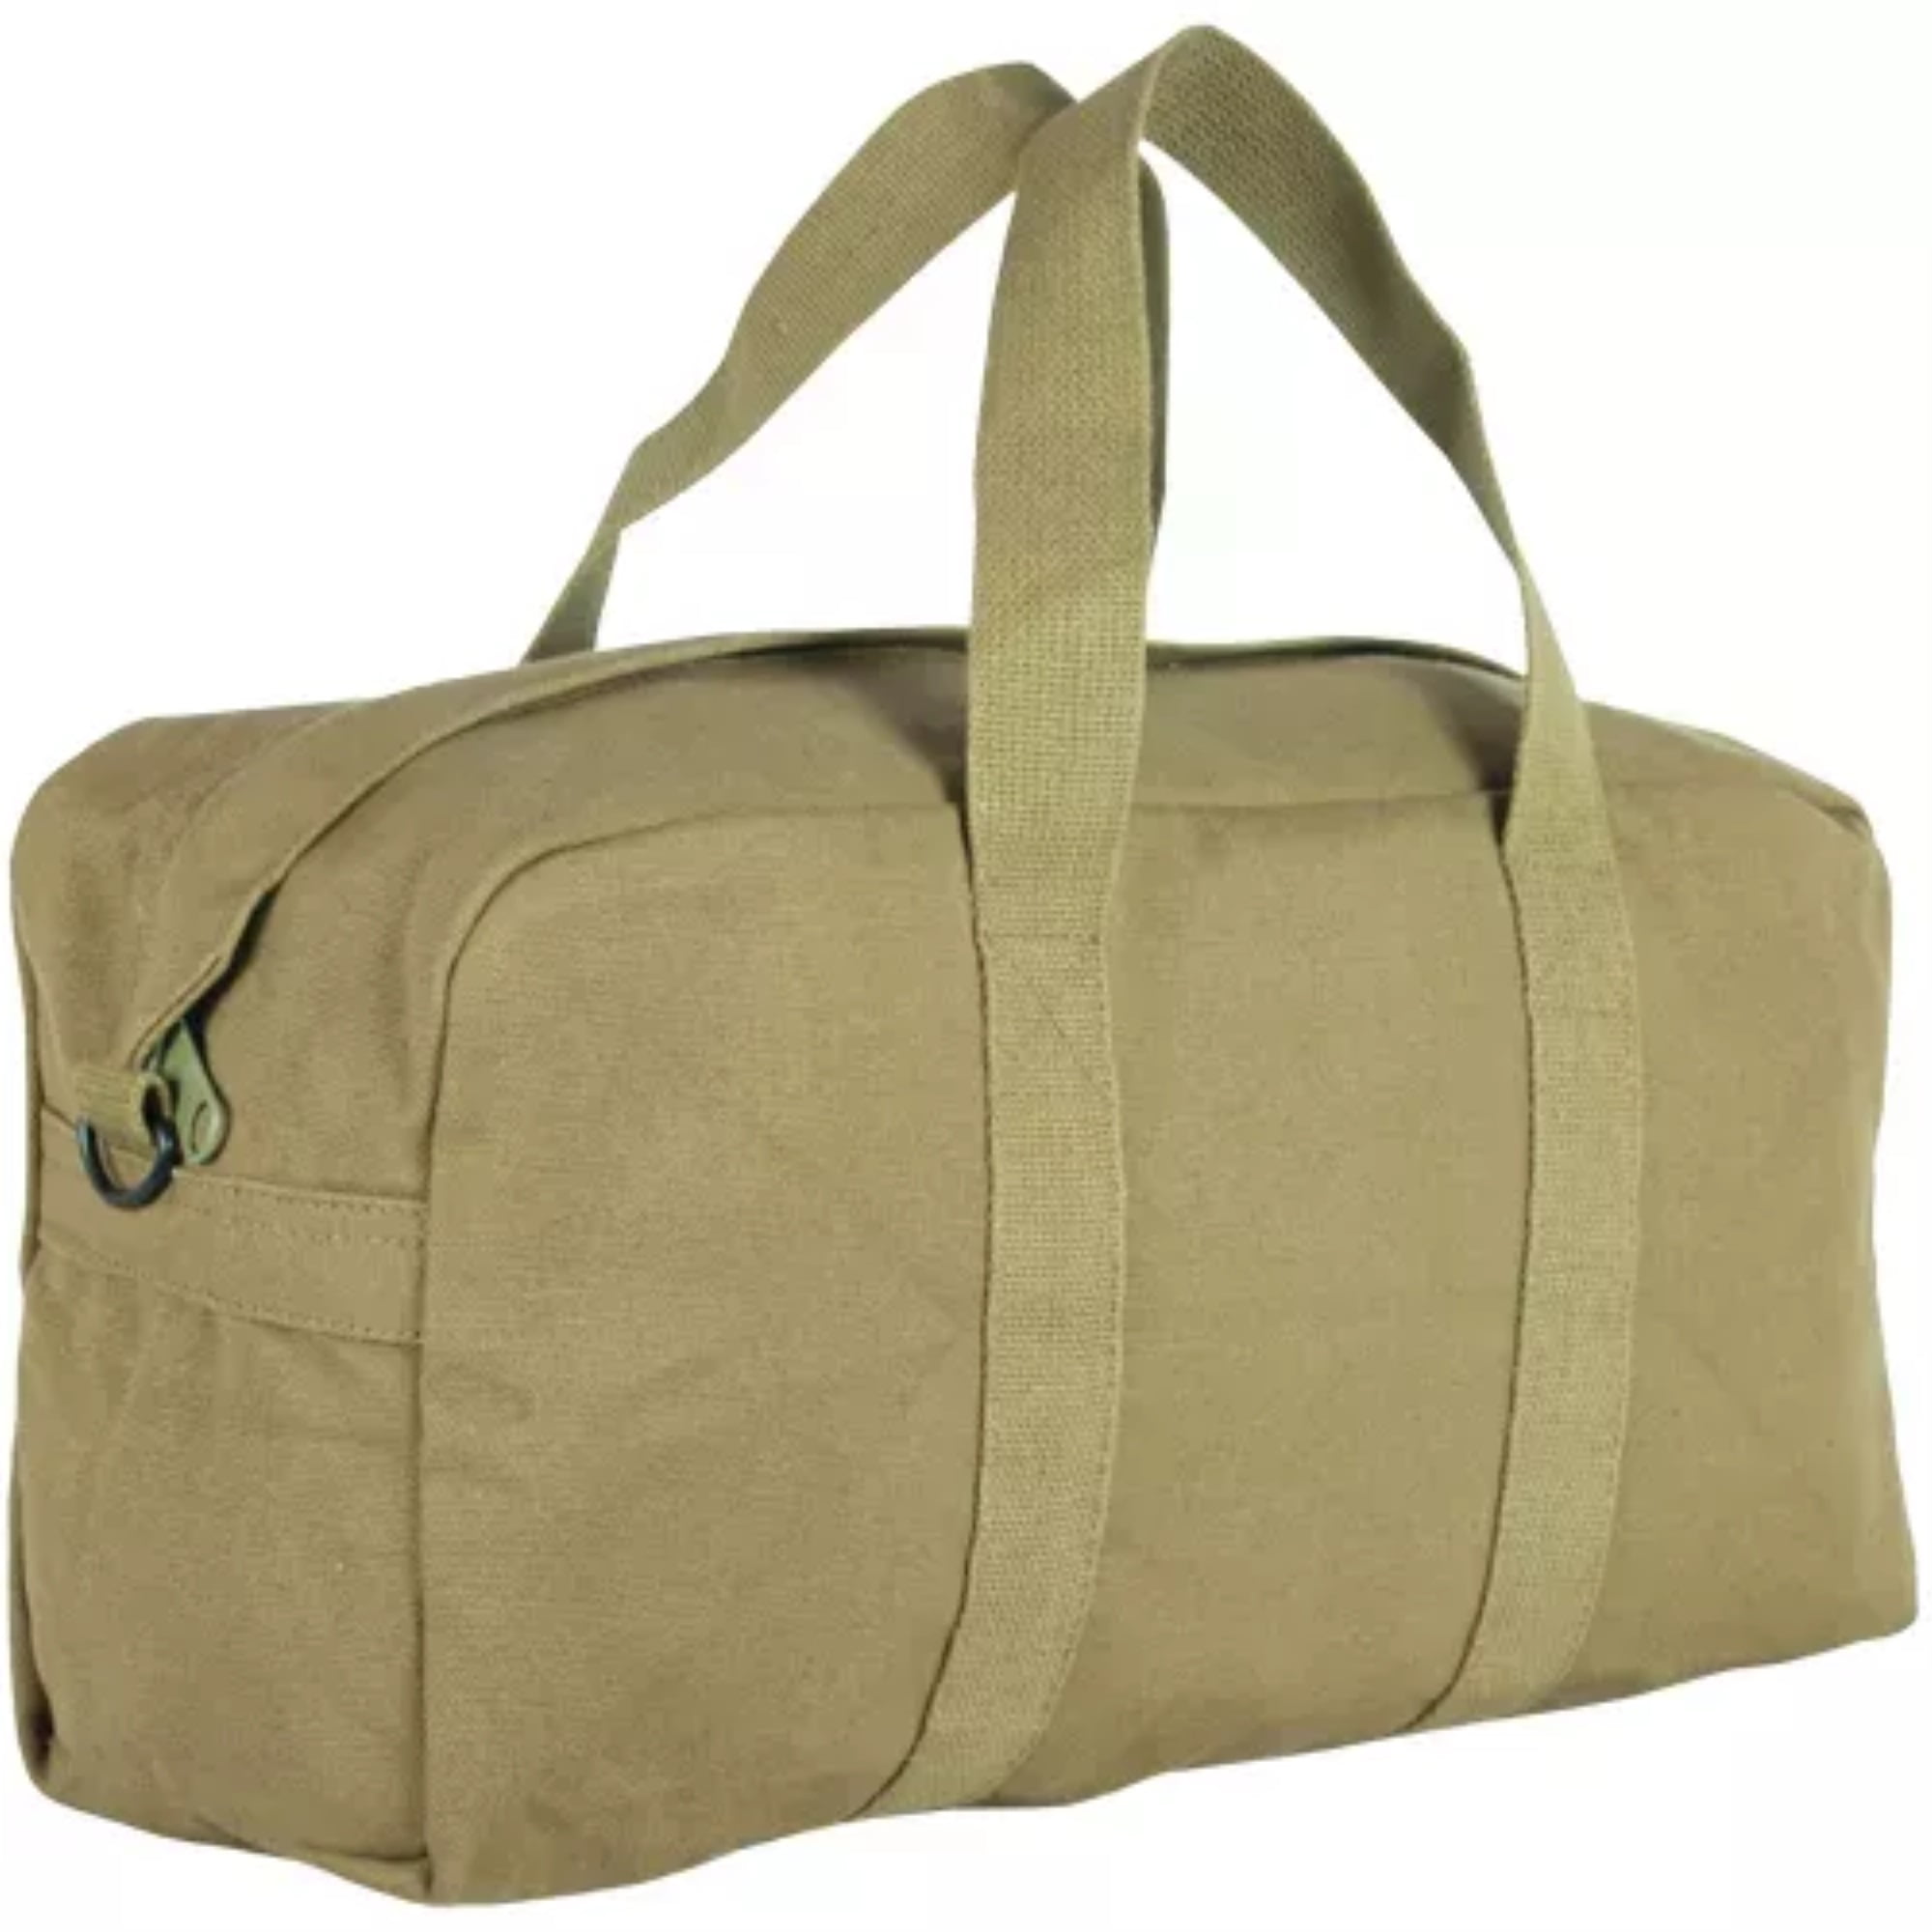 2 Pockets 7" Height Canvas TEXSPORT 11830 Tool Bag Olive Green 